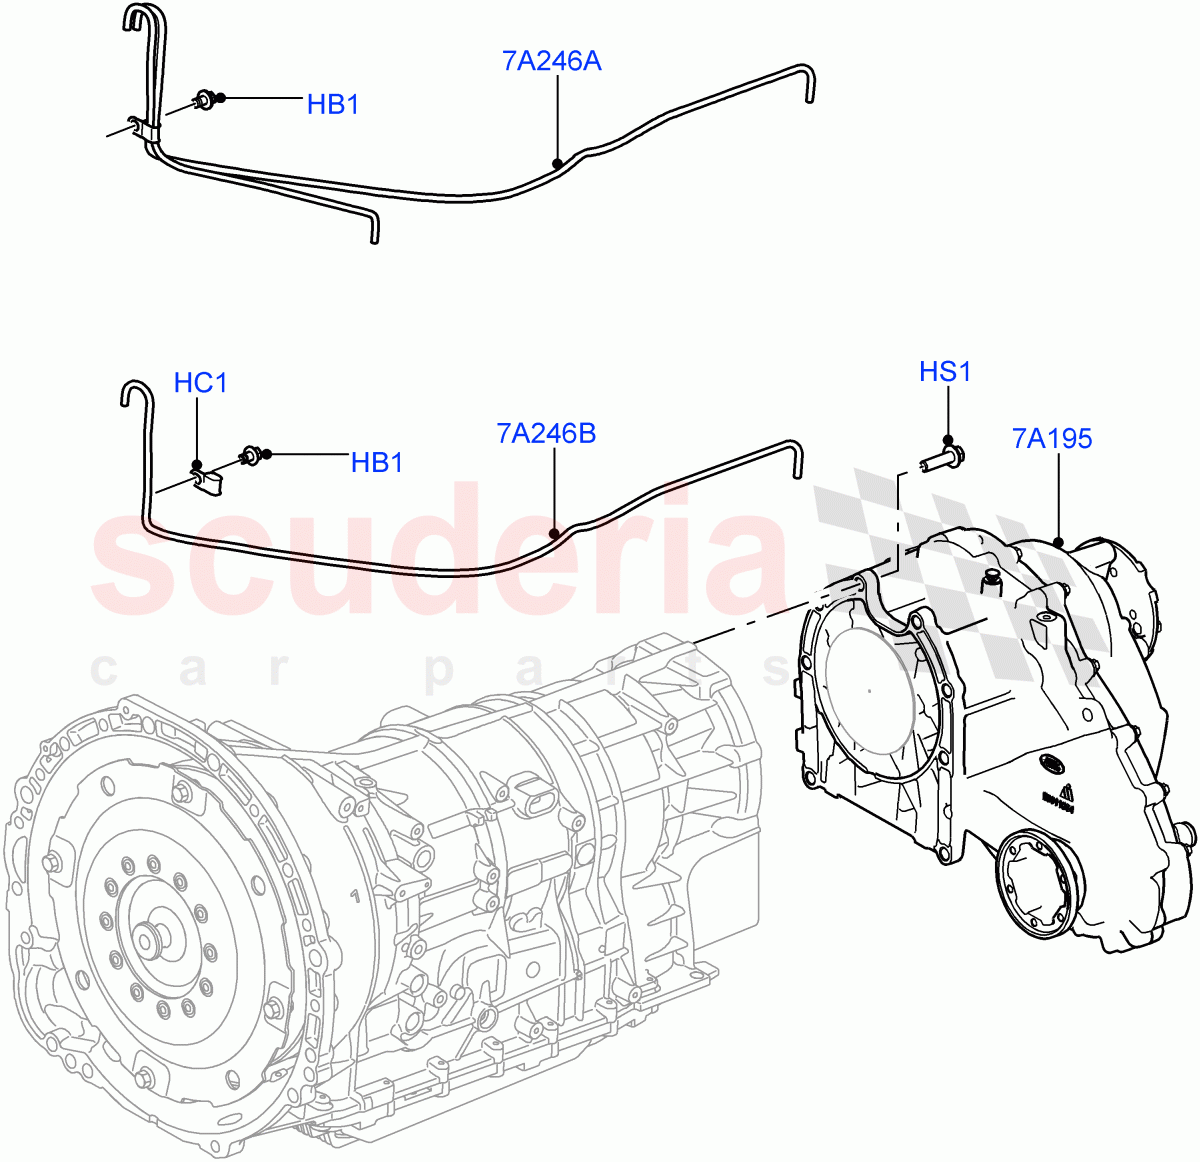 Transfer Drive Case(8 Speed Auto Trans ZF 8HP70 4WD,With 1 Speed Transfer Case,8 Speed Auto Trans ZF 8HP45)((V)FROMEA000001,(V)TOGA999999) of Land Rover Land Rover Discovery 4 (2010-2016) [3.0 Diesel 24V DOHC TC]